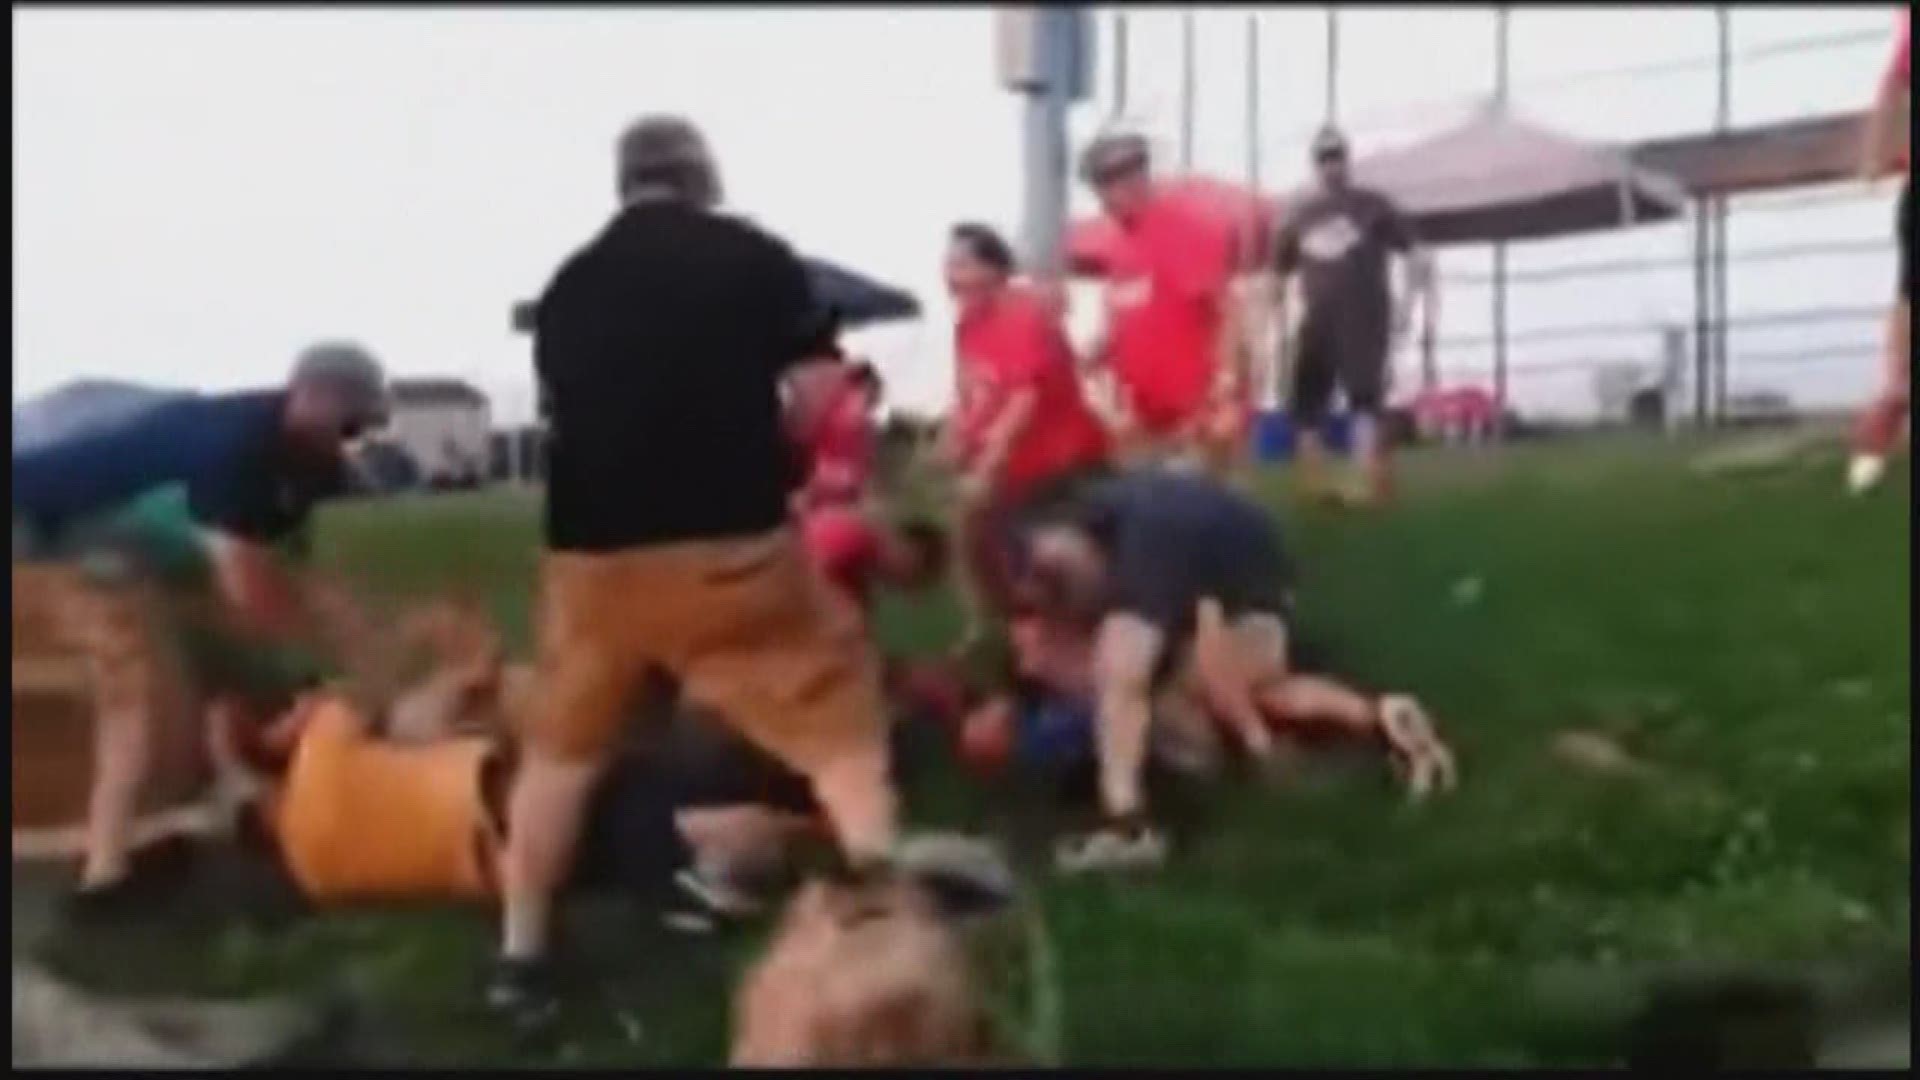 A video shows more than a half-dozen fans tackling each other to the ground amid a flurry of punches and kicks.